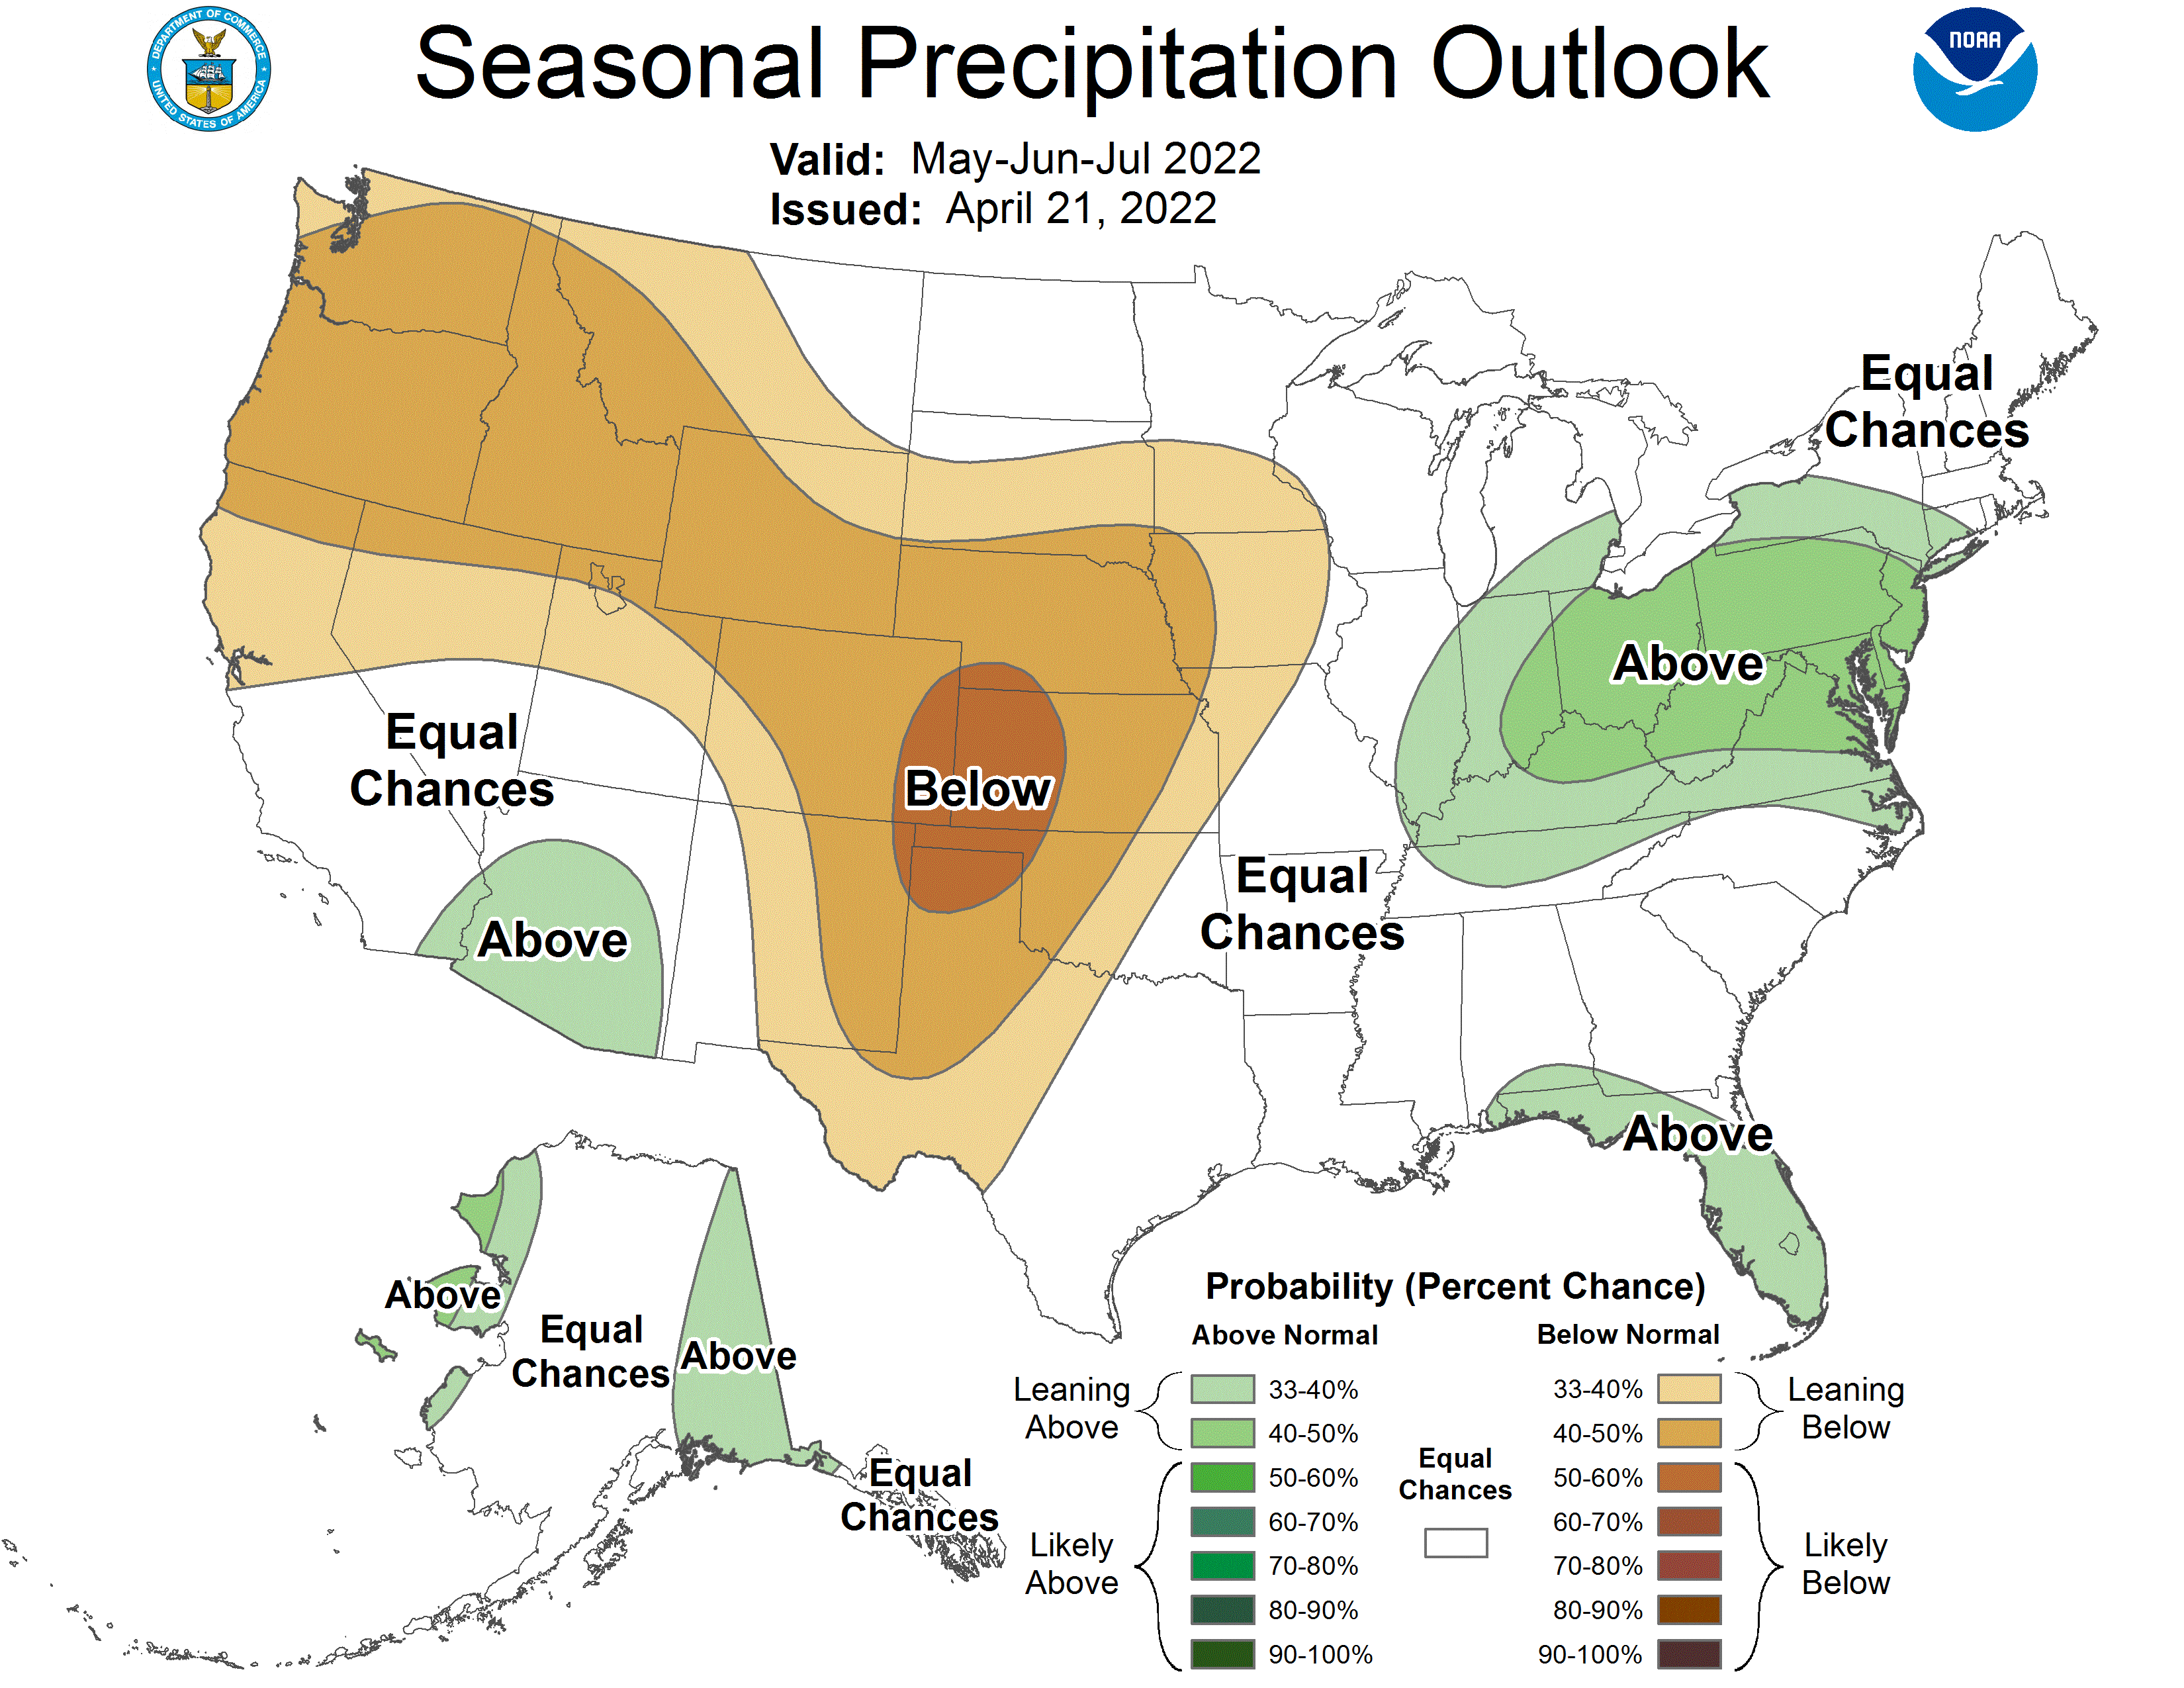 Figure 2. Precipitation outlook for the May-June-July 2022 period. These are produced by the national Climate Prediction Center and illustrate confidence of favoring above- or below-normal conditions.